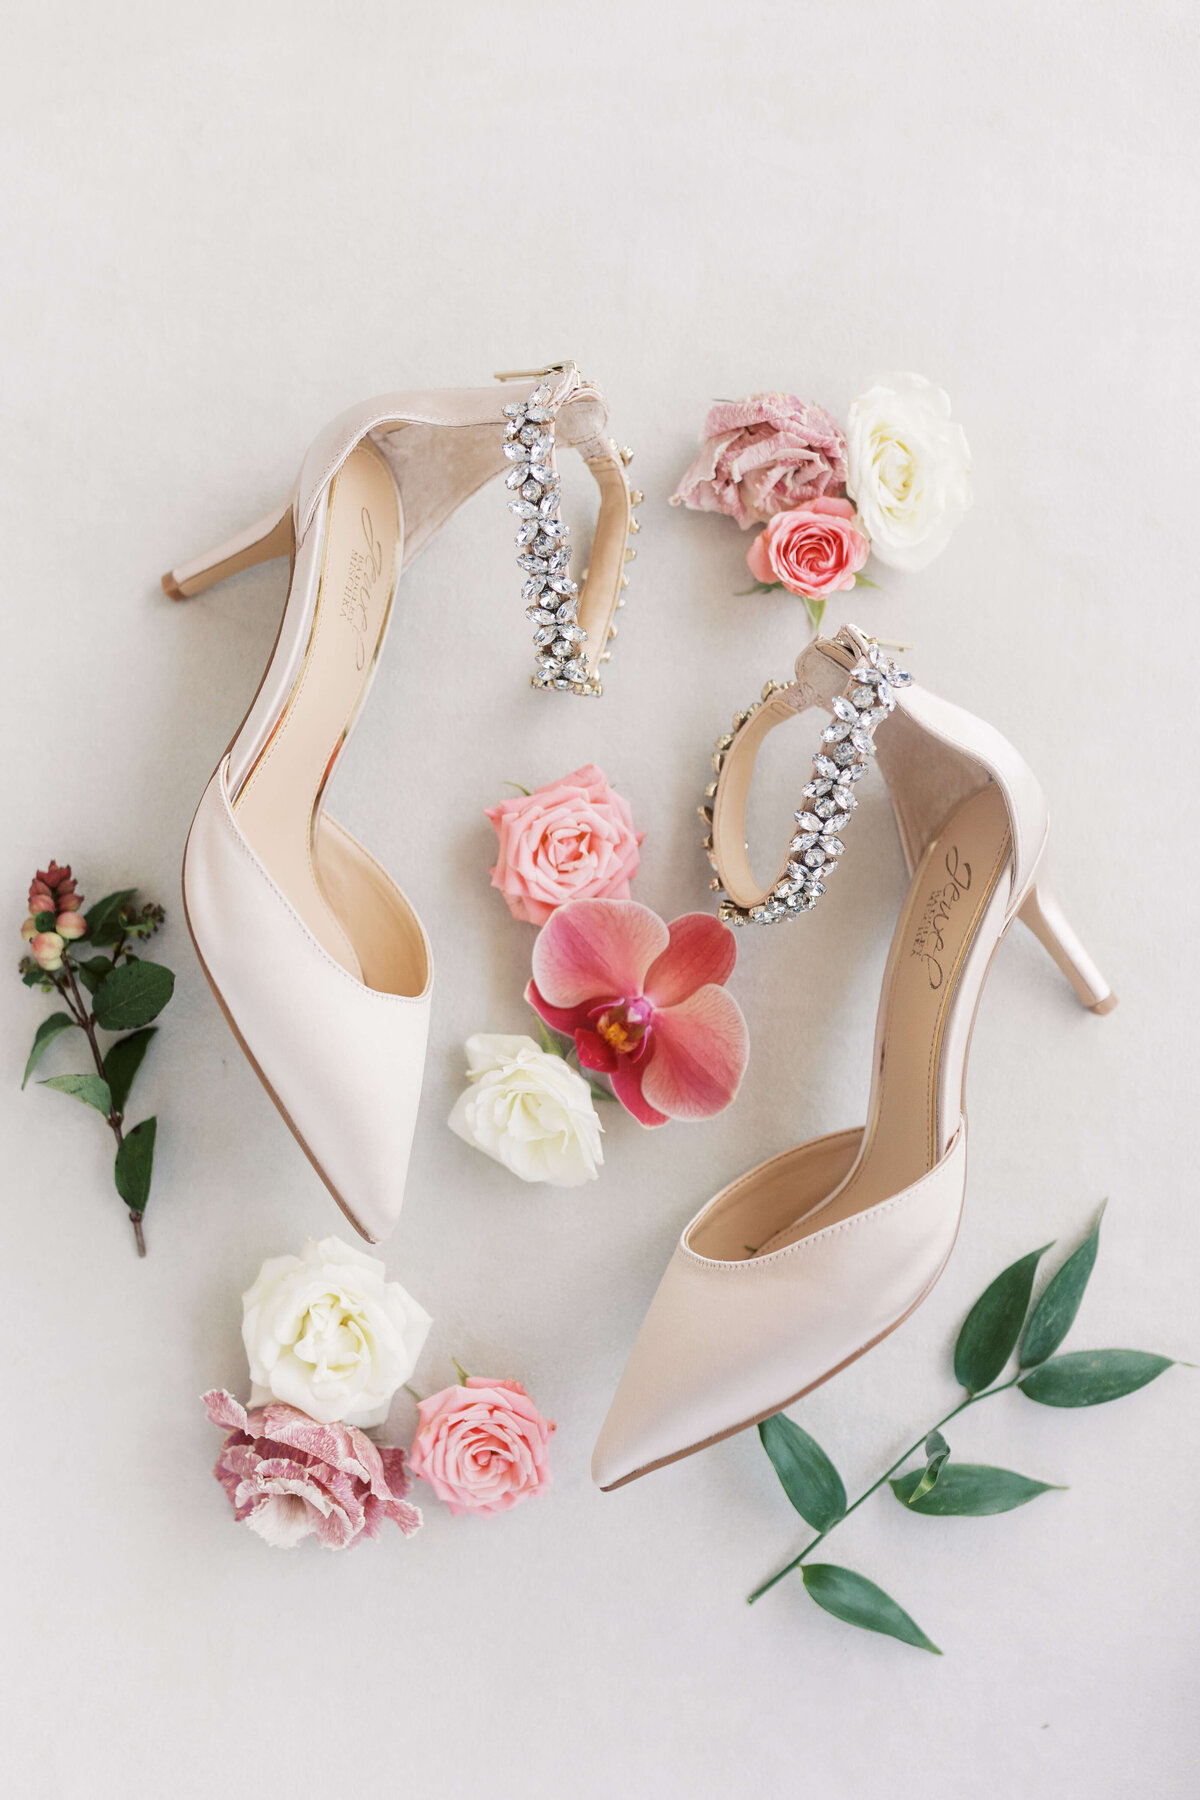 Badgely Mischka Jewel shoes styled with Florals from Rosaspina Florals.